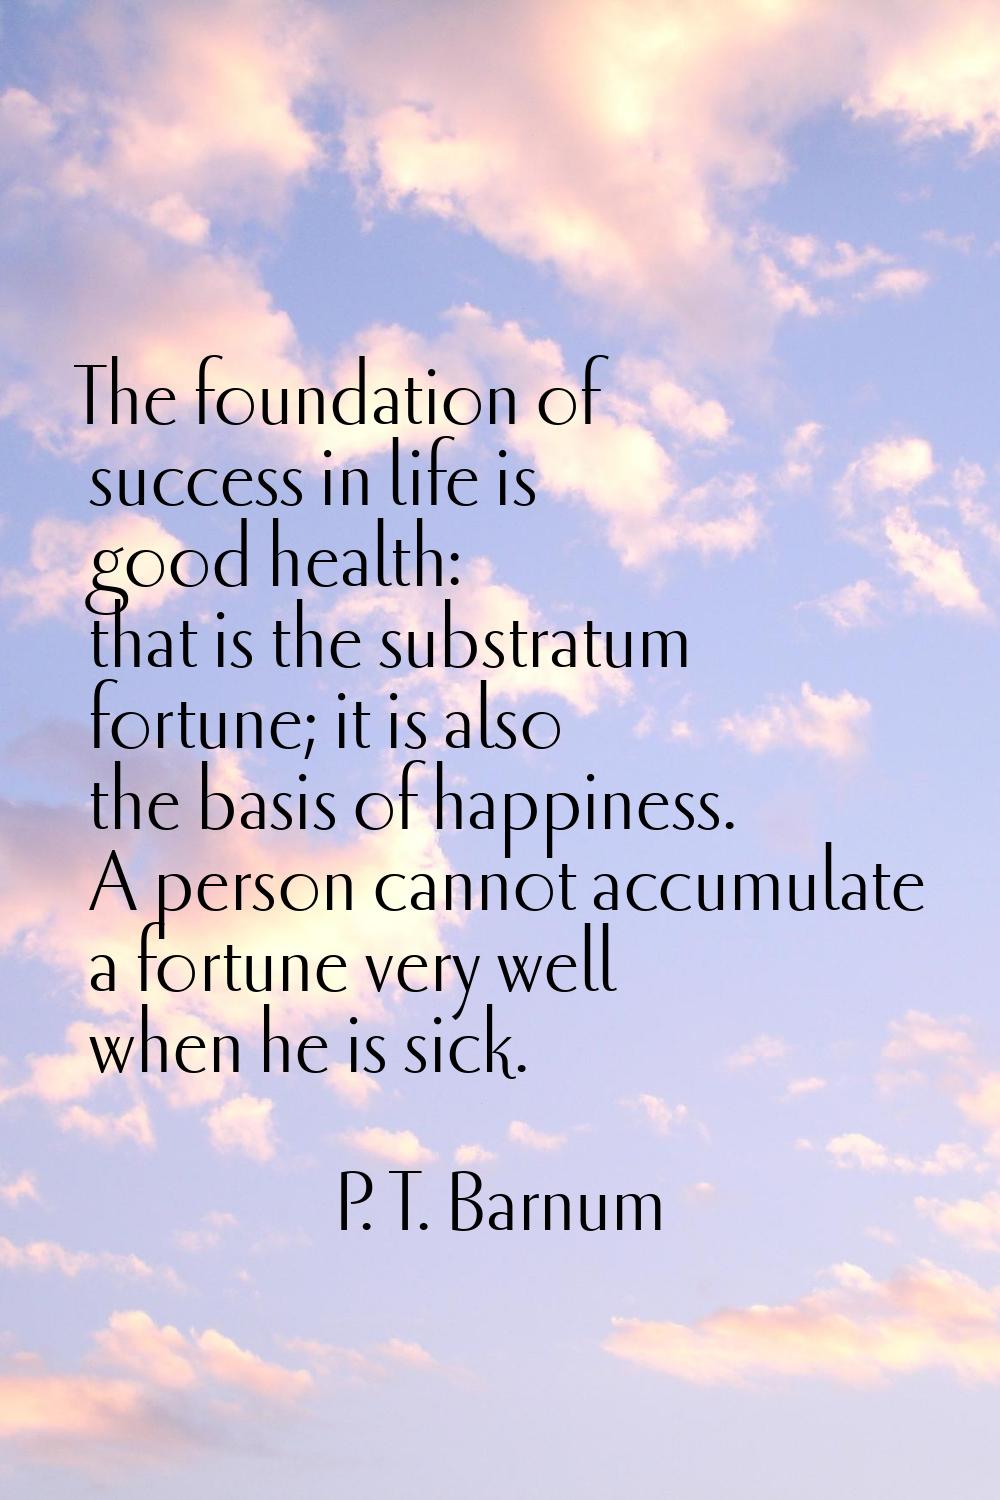 The foundation of success in life is good health: that is the substratum fortune; it is also the ba